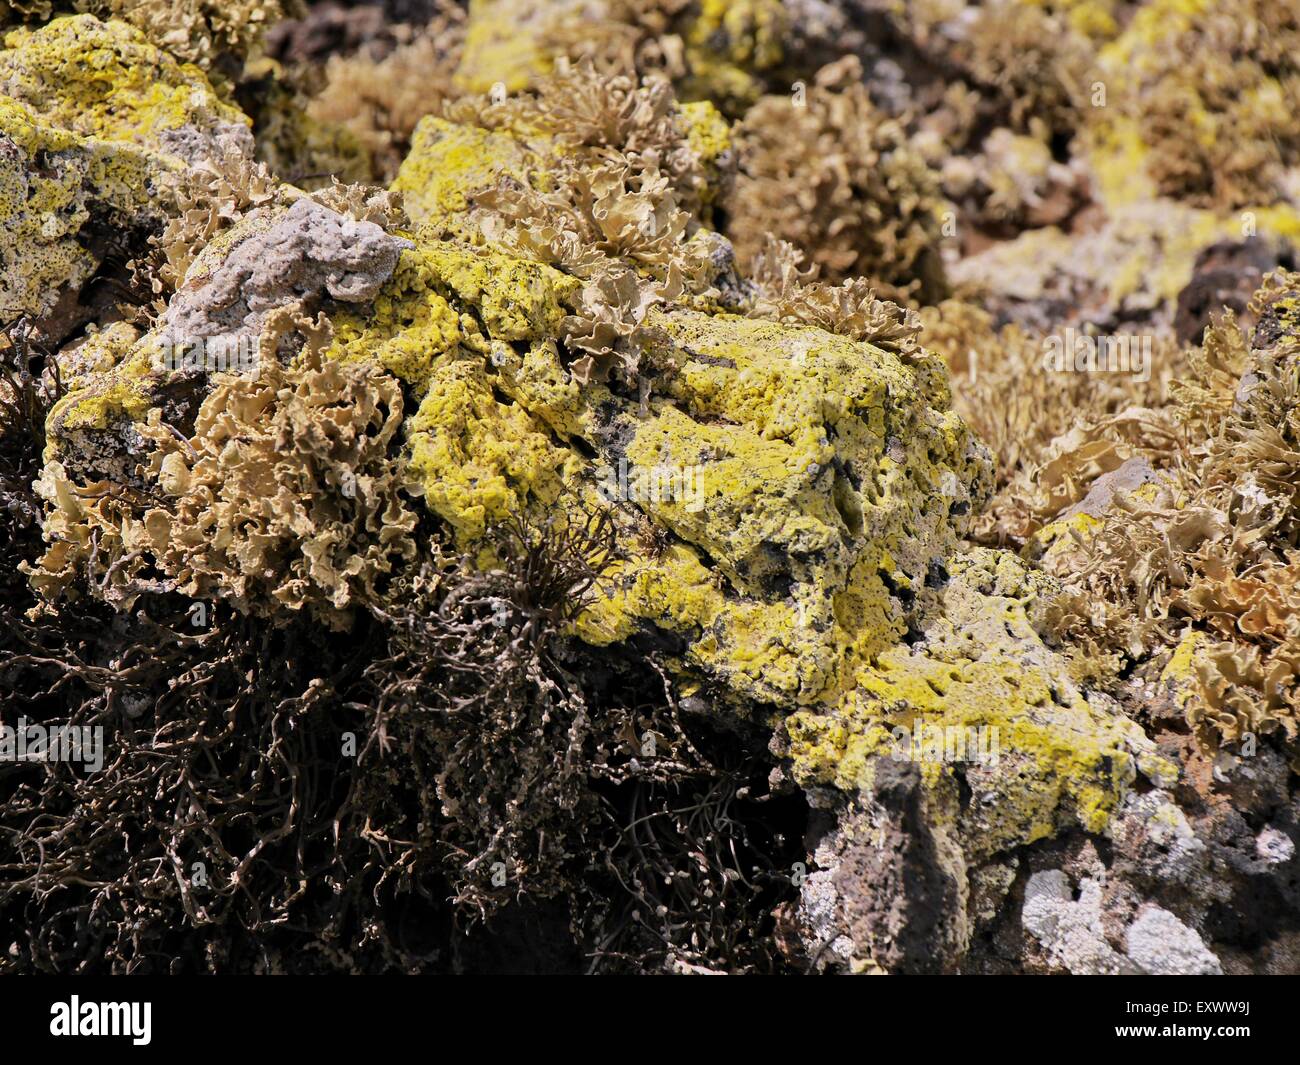 Igneous rocks with lichens, Lanzarote, Canaries, Spain, Europe Stock Photo